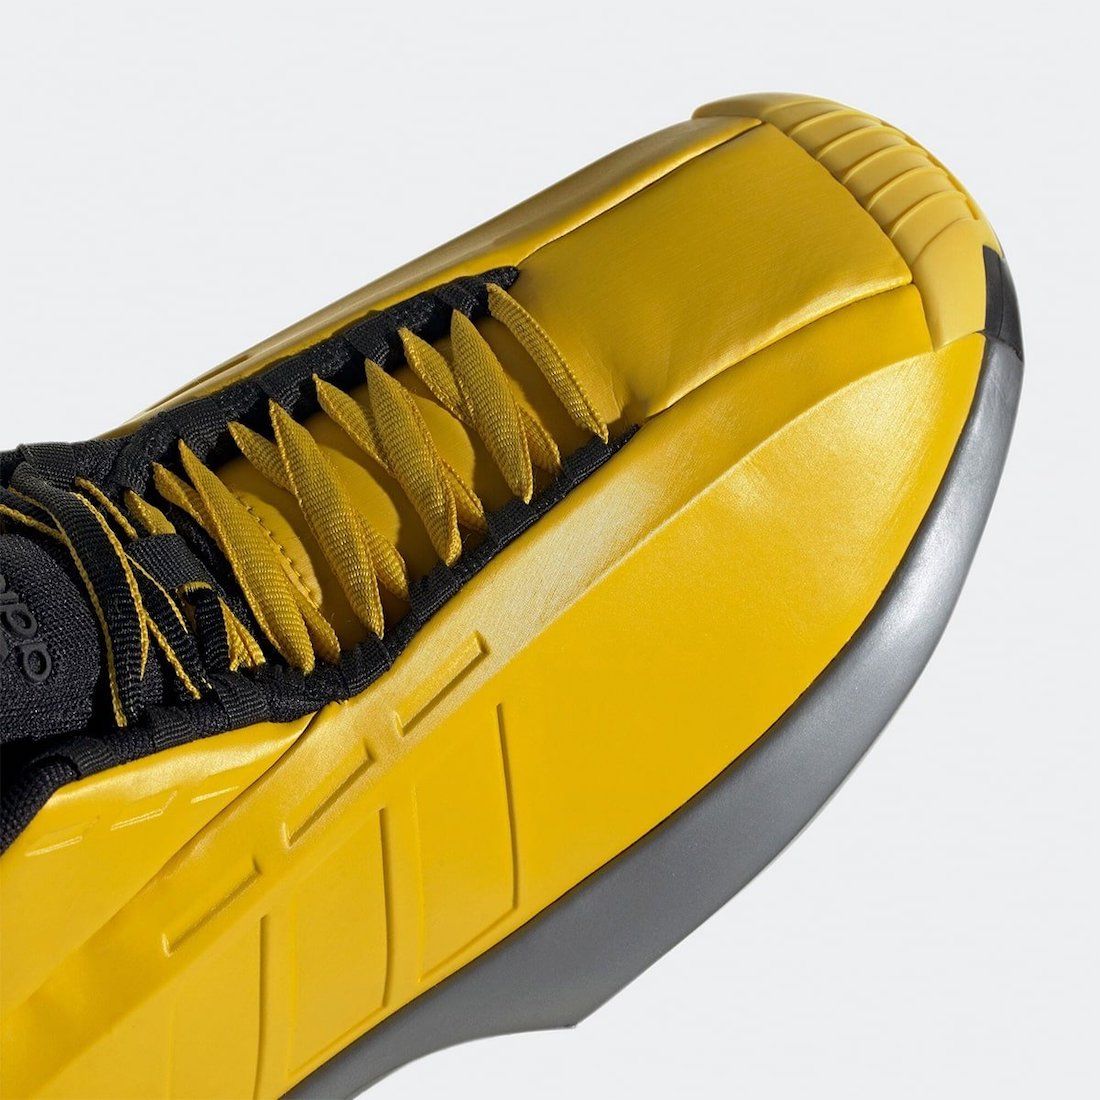 adidas-crazy-1-sunshine-GY3808-release-date